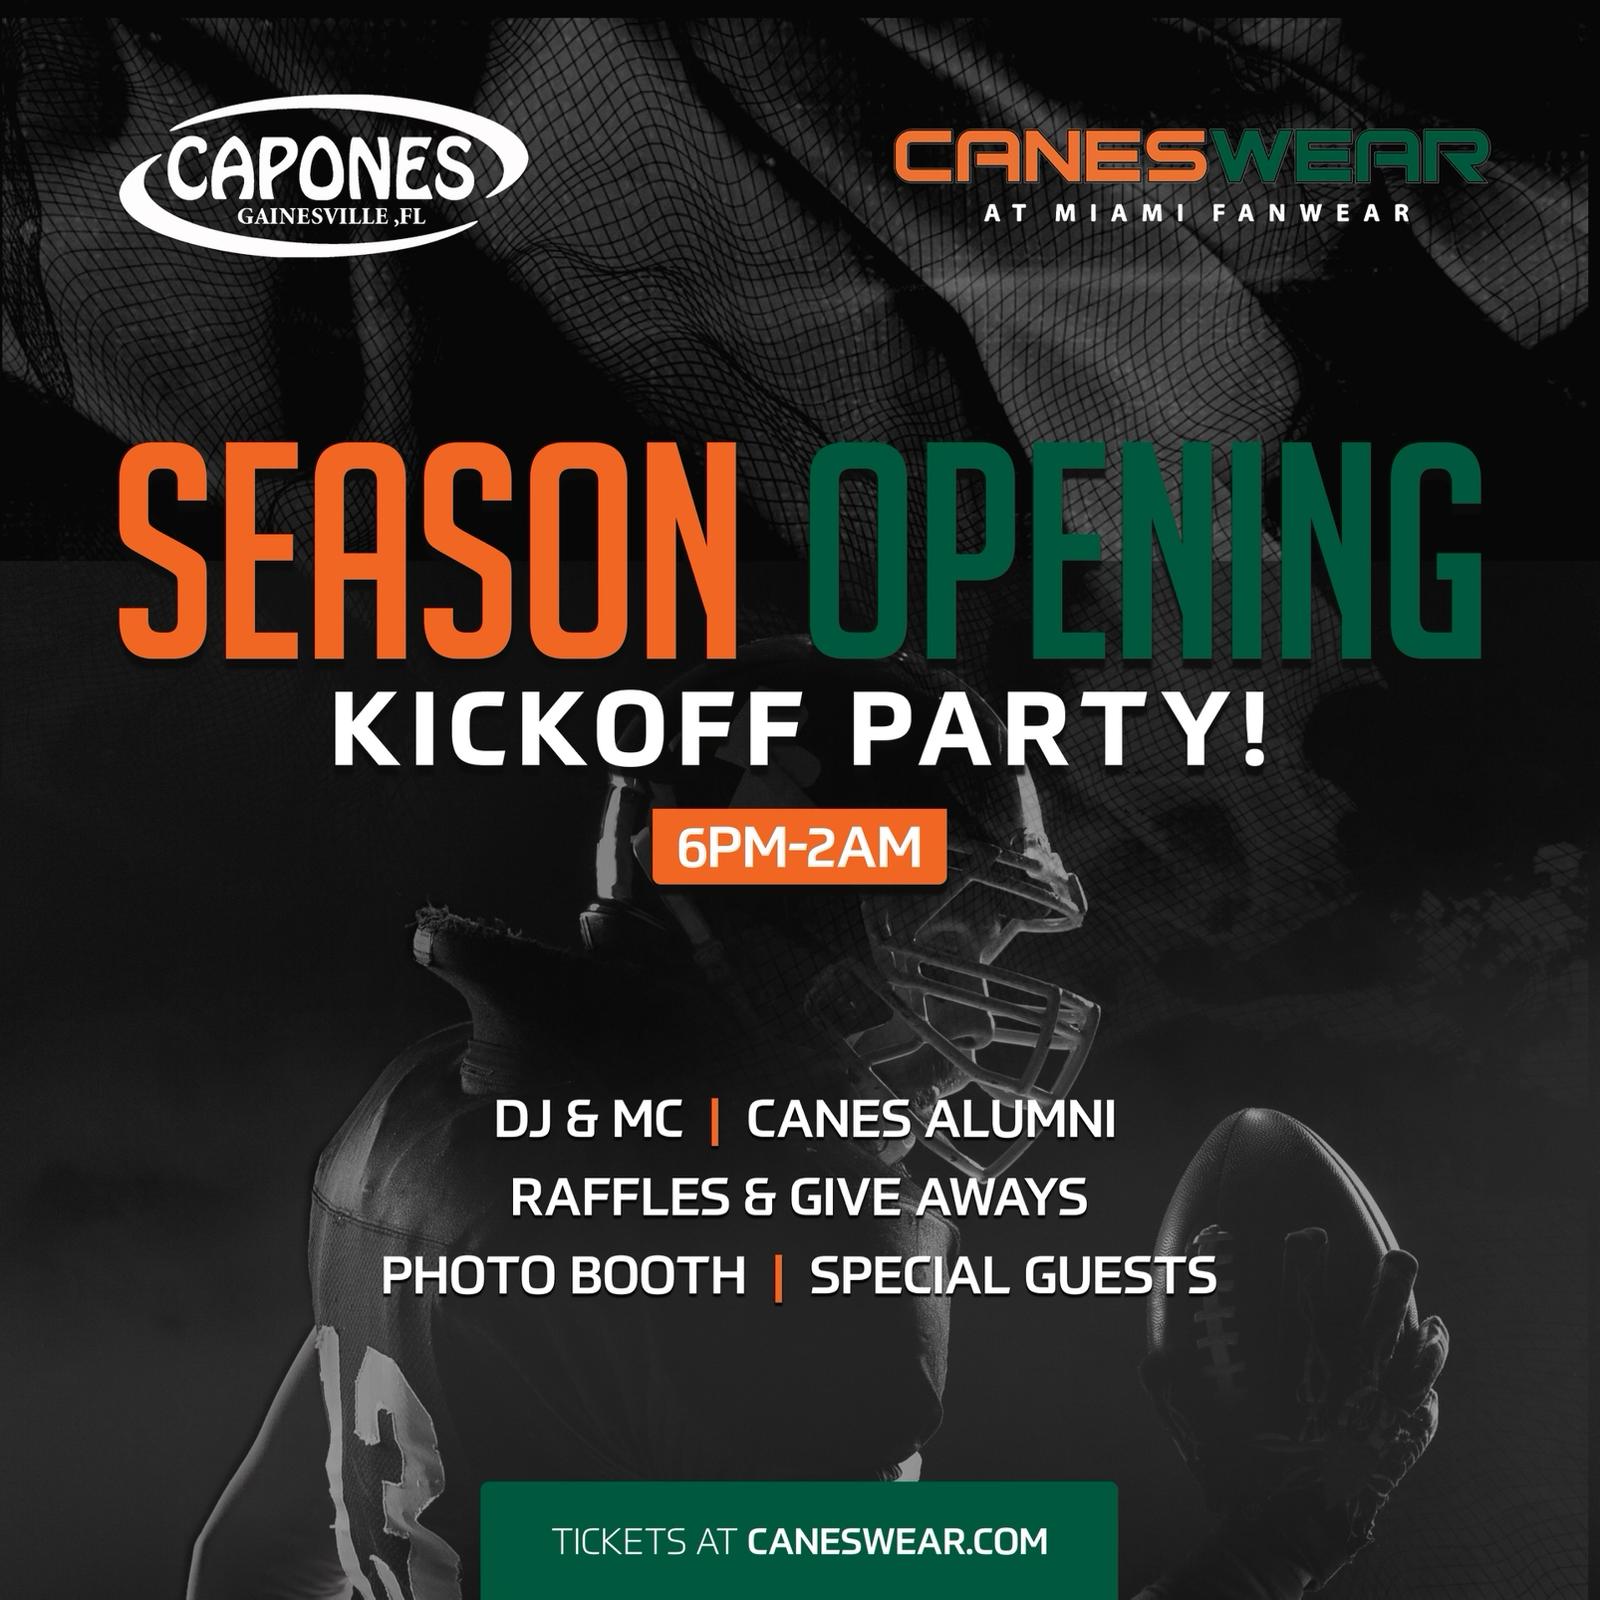 CanesWear / Capones Season Opening Kickoff Party - Gainesville 8/30